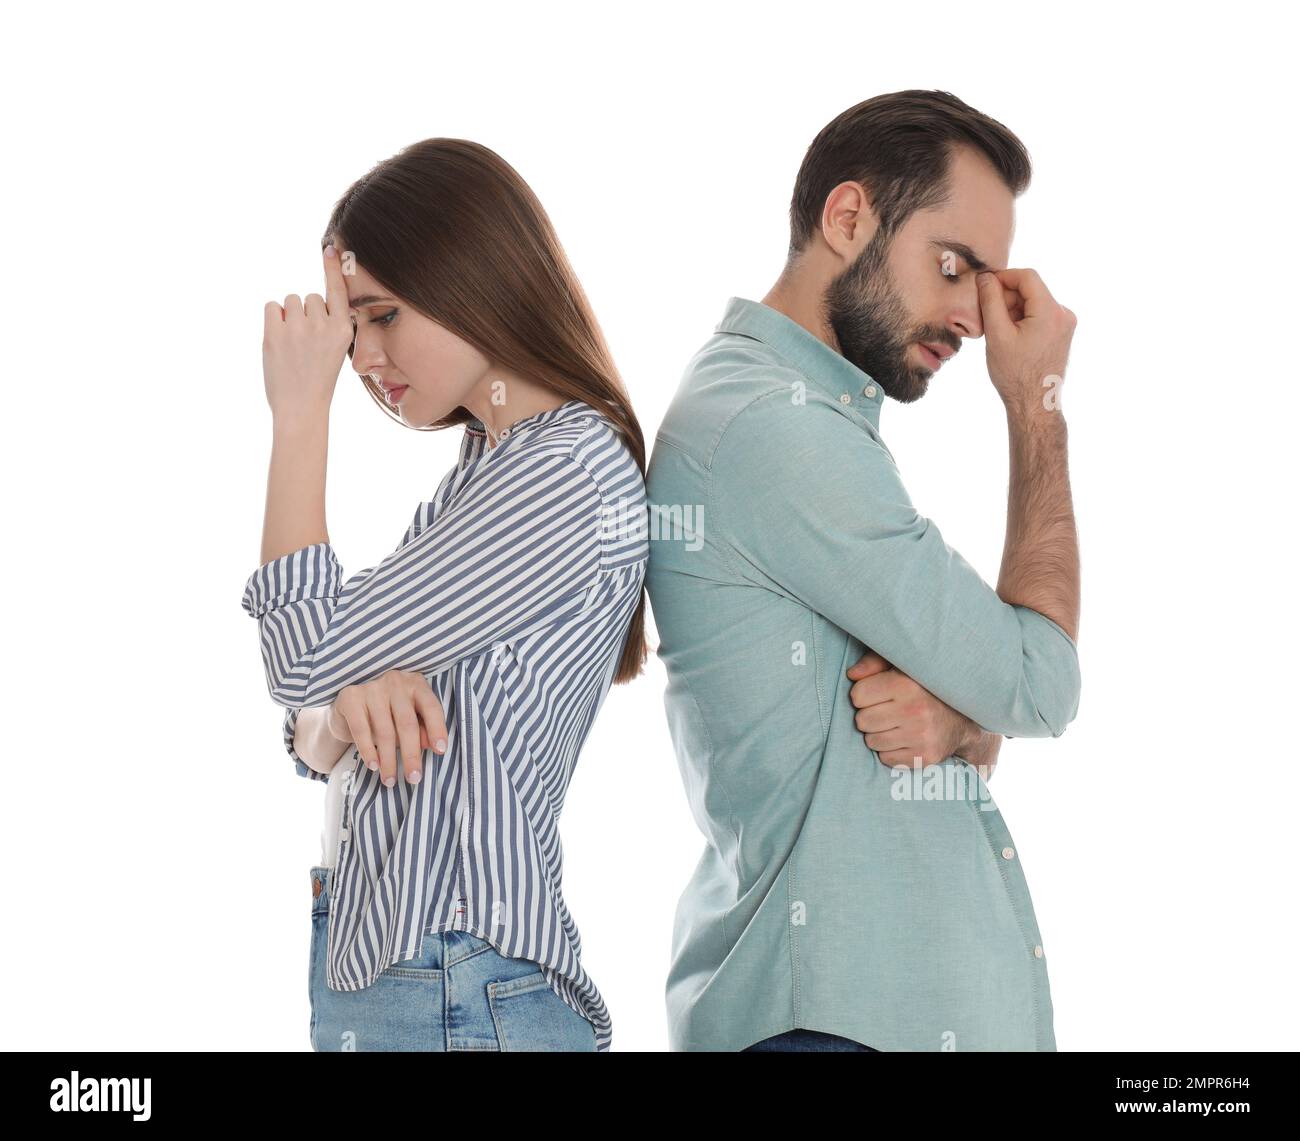 Couple with relationship problems on white background Stock Photo